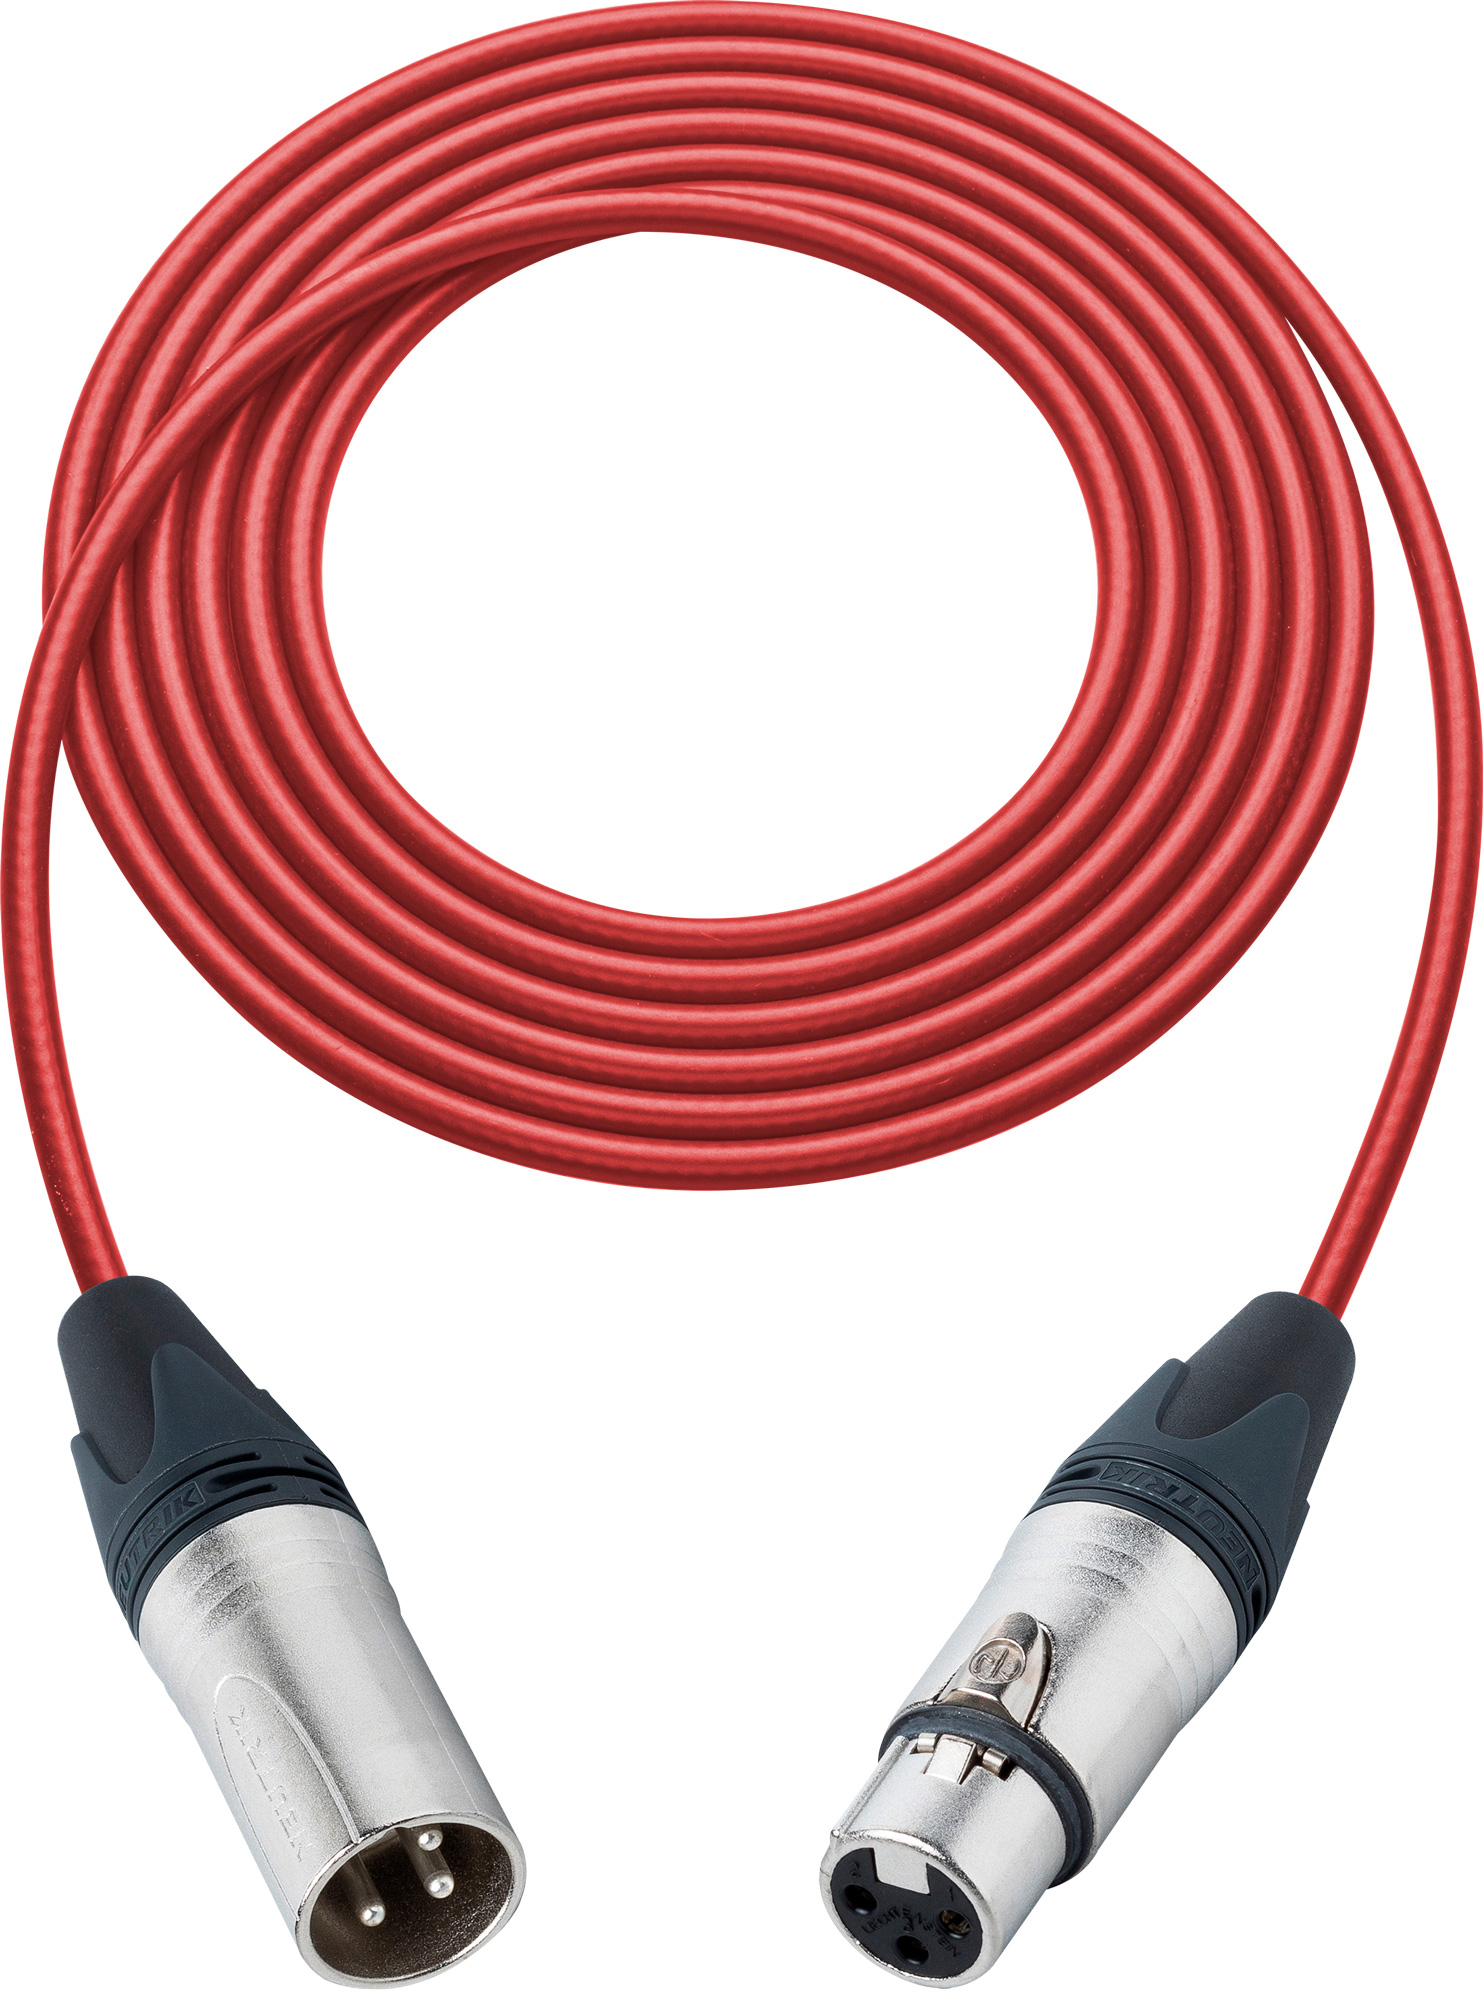 Pro Stage Series XLR Cable - 100 feet RED L2-100XXJRD